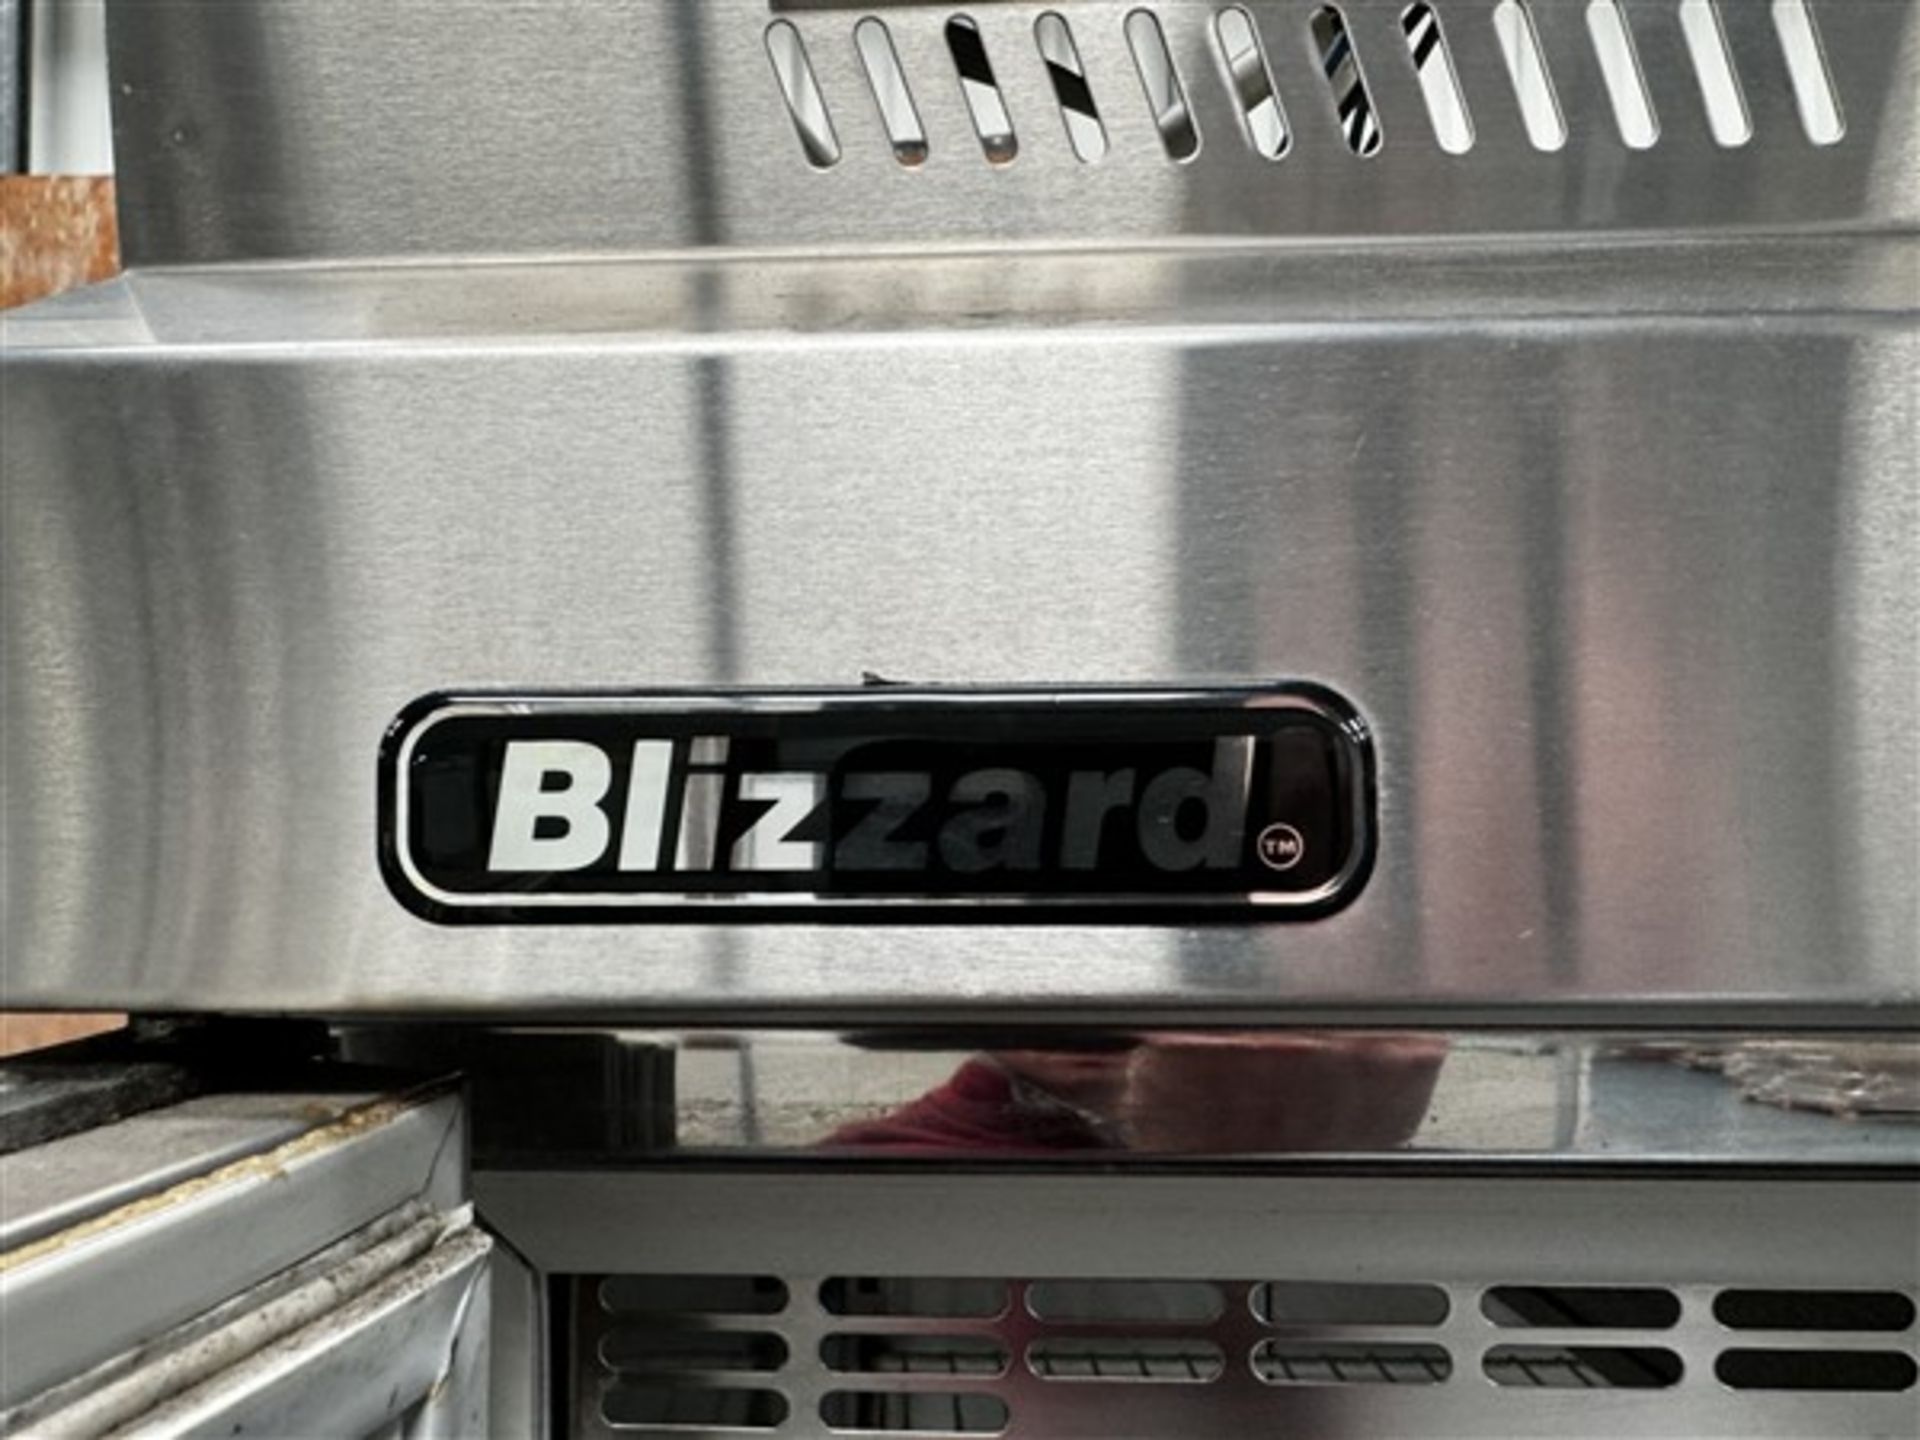 Blizzard refrigeration stainless steel double door refrigerator , serial no. CE2140LW-020102 - Image 5 of 6